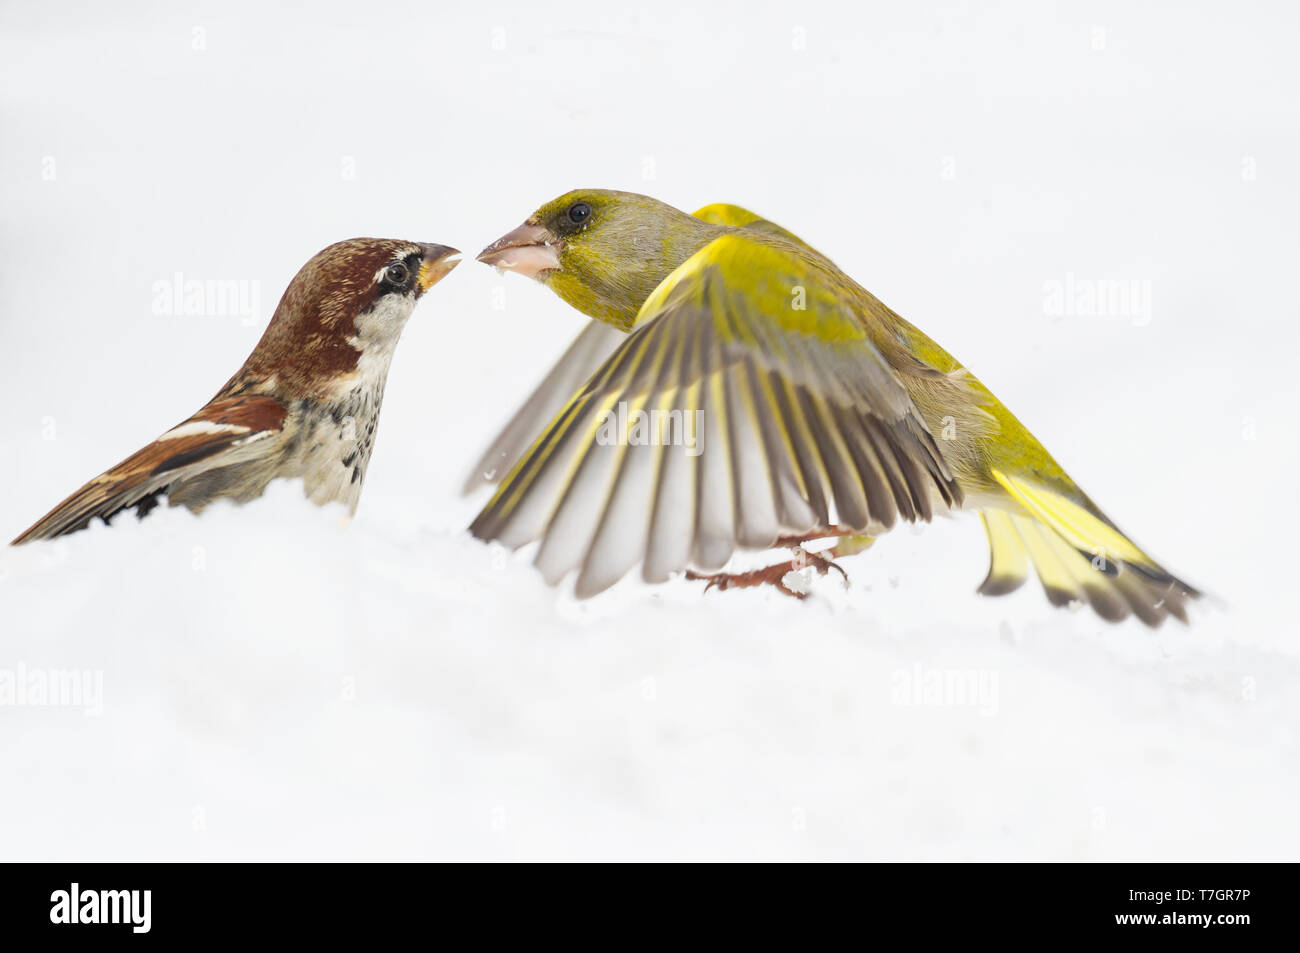 European Greenfinch fighting with a male house sparrow Stock Photo